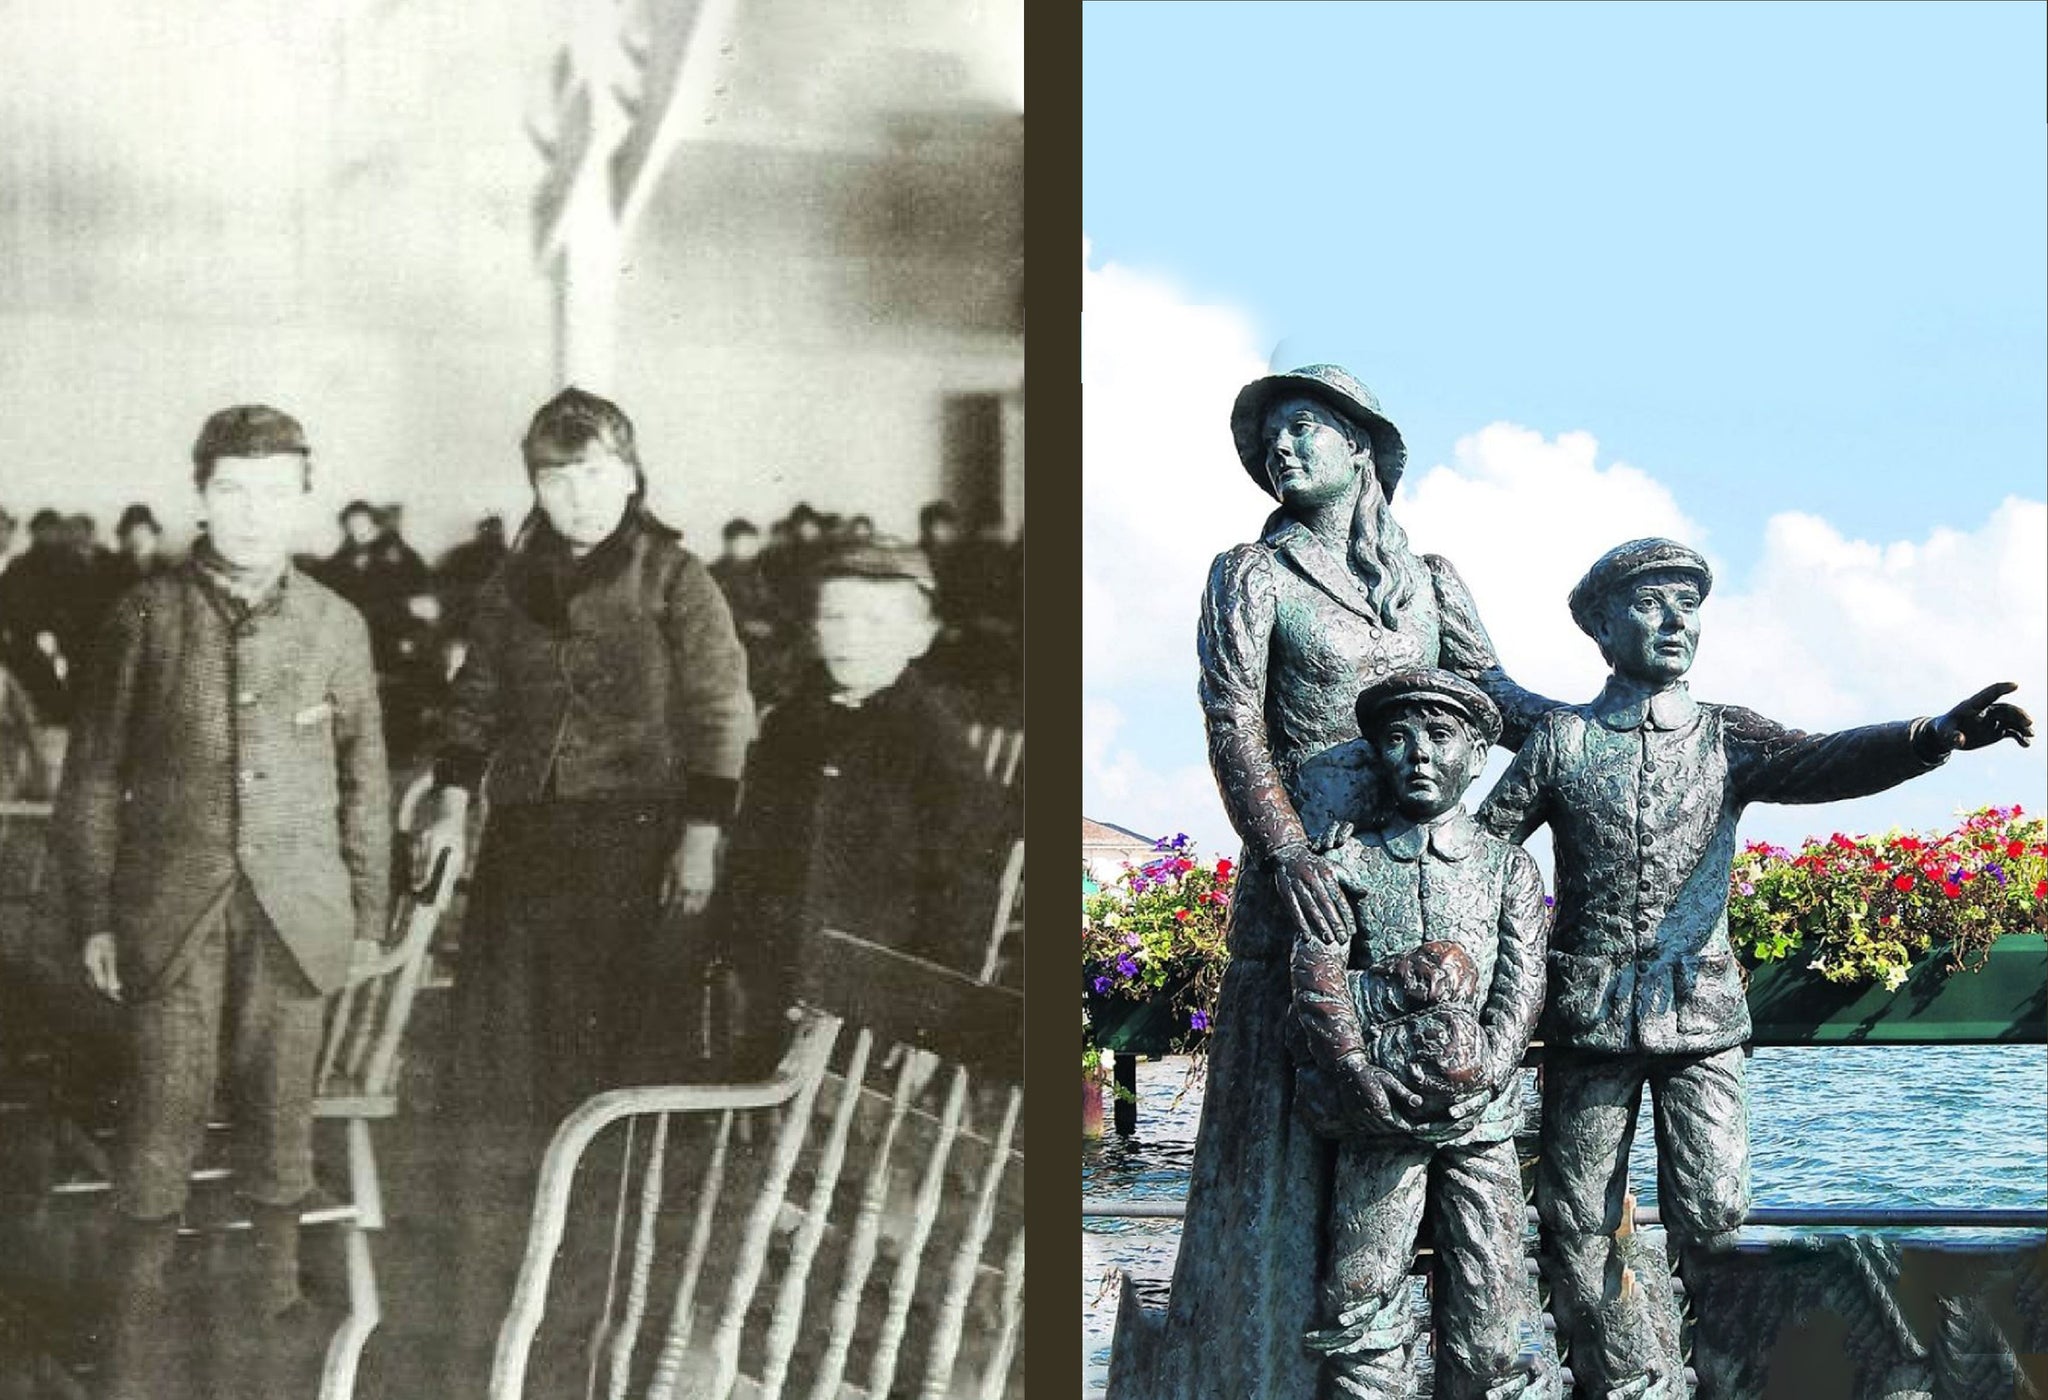 Jac Lahav, "Now and Then (Annie Moore Diptych)"